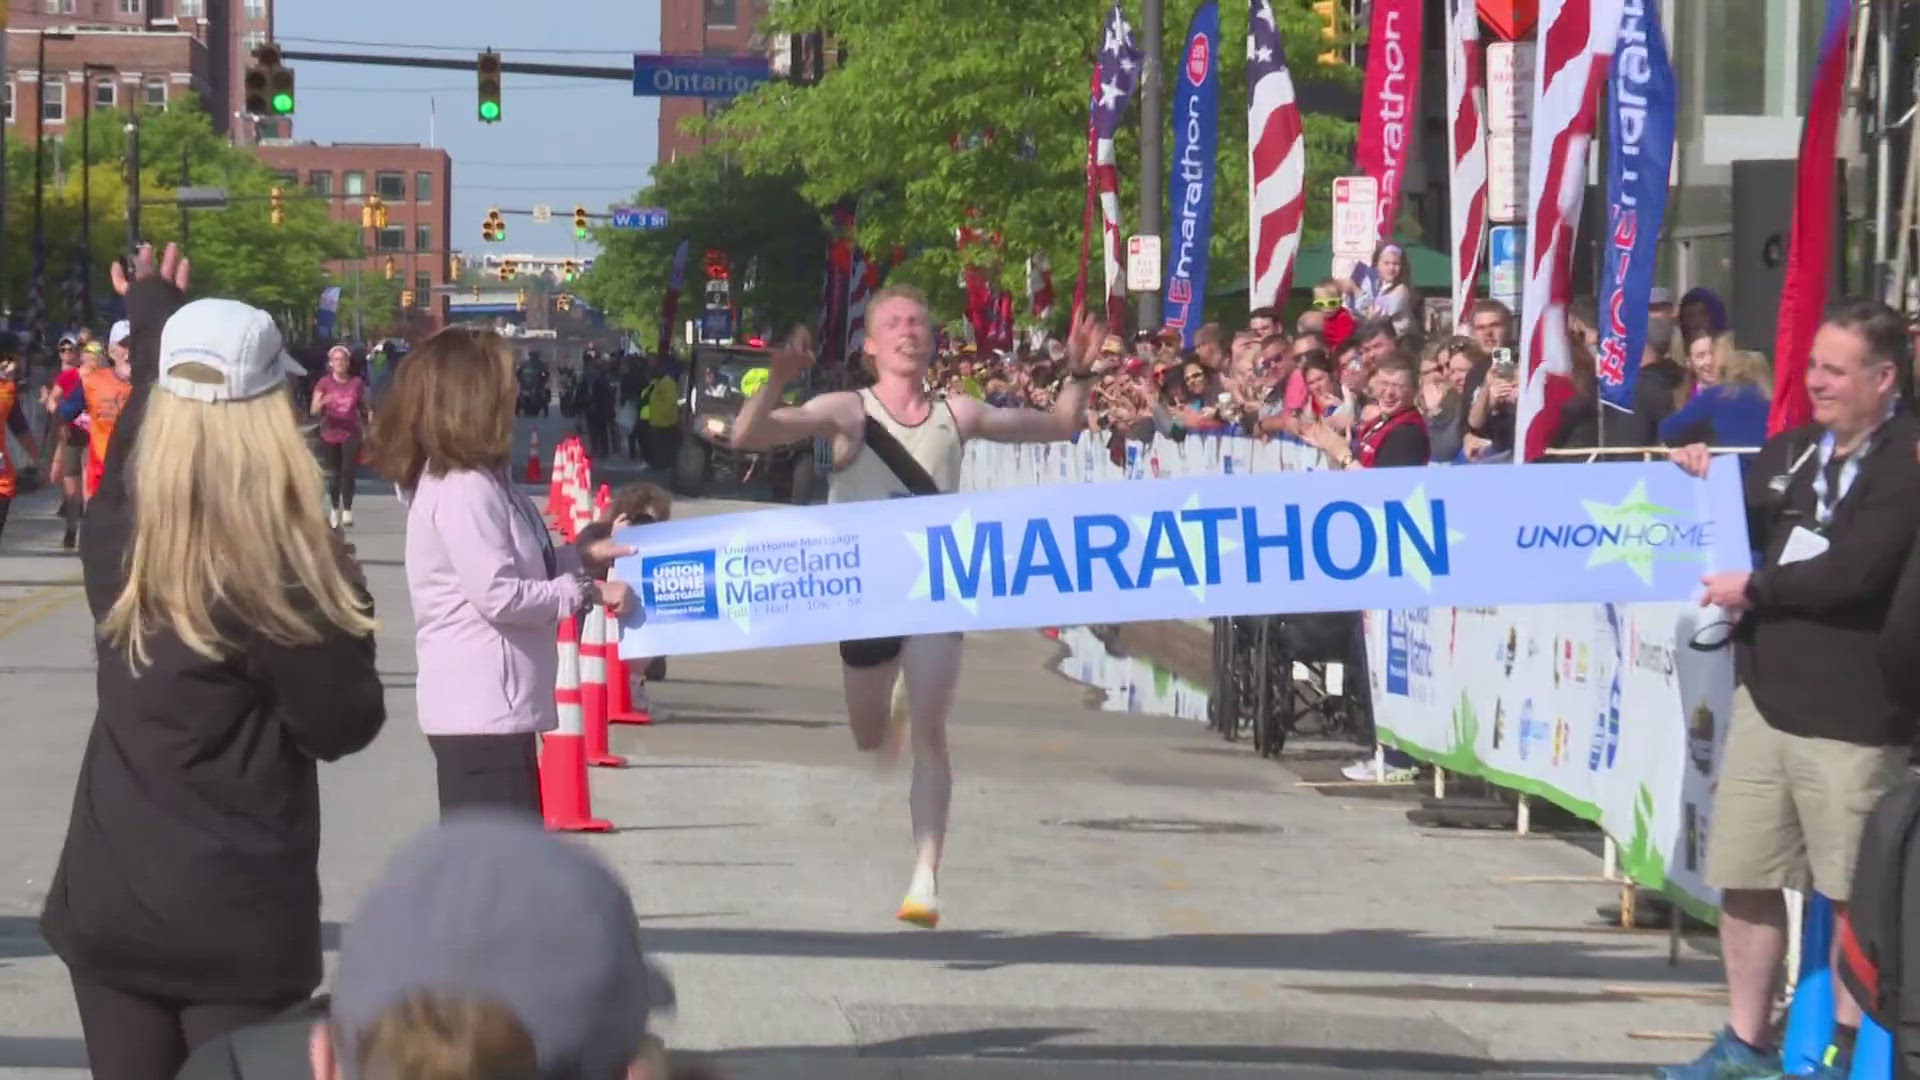 Events for the Cleveland Marathon will begin on Friday, May 17, with races on Saturday, May 18, and Sunday, May 19.